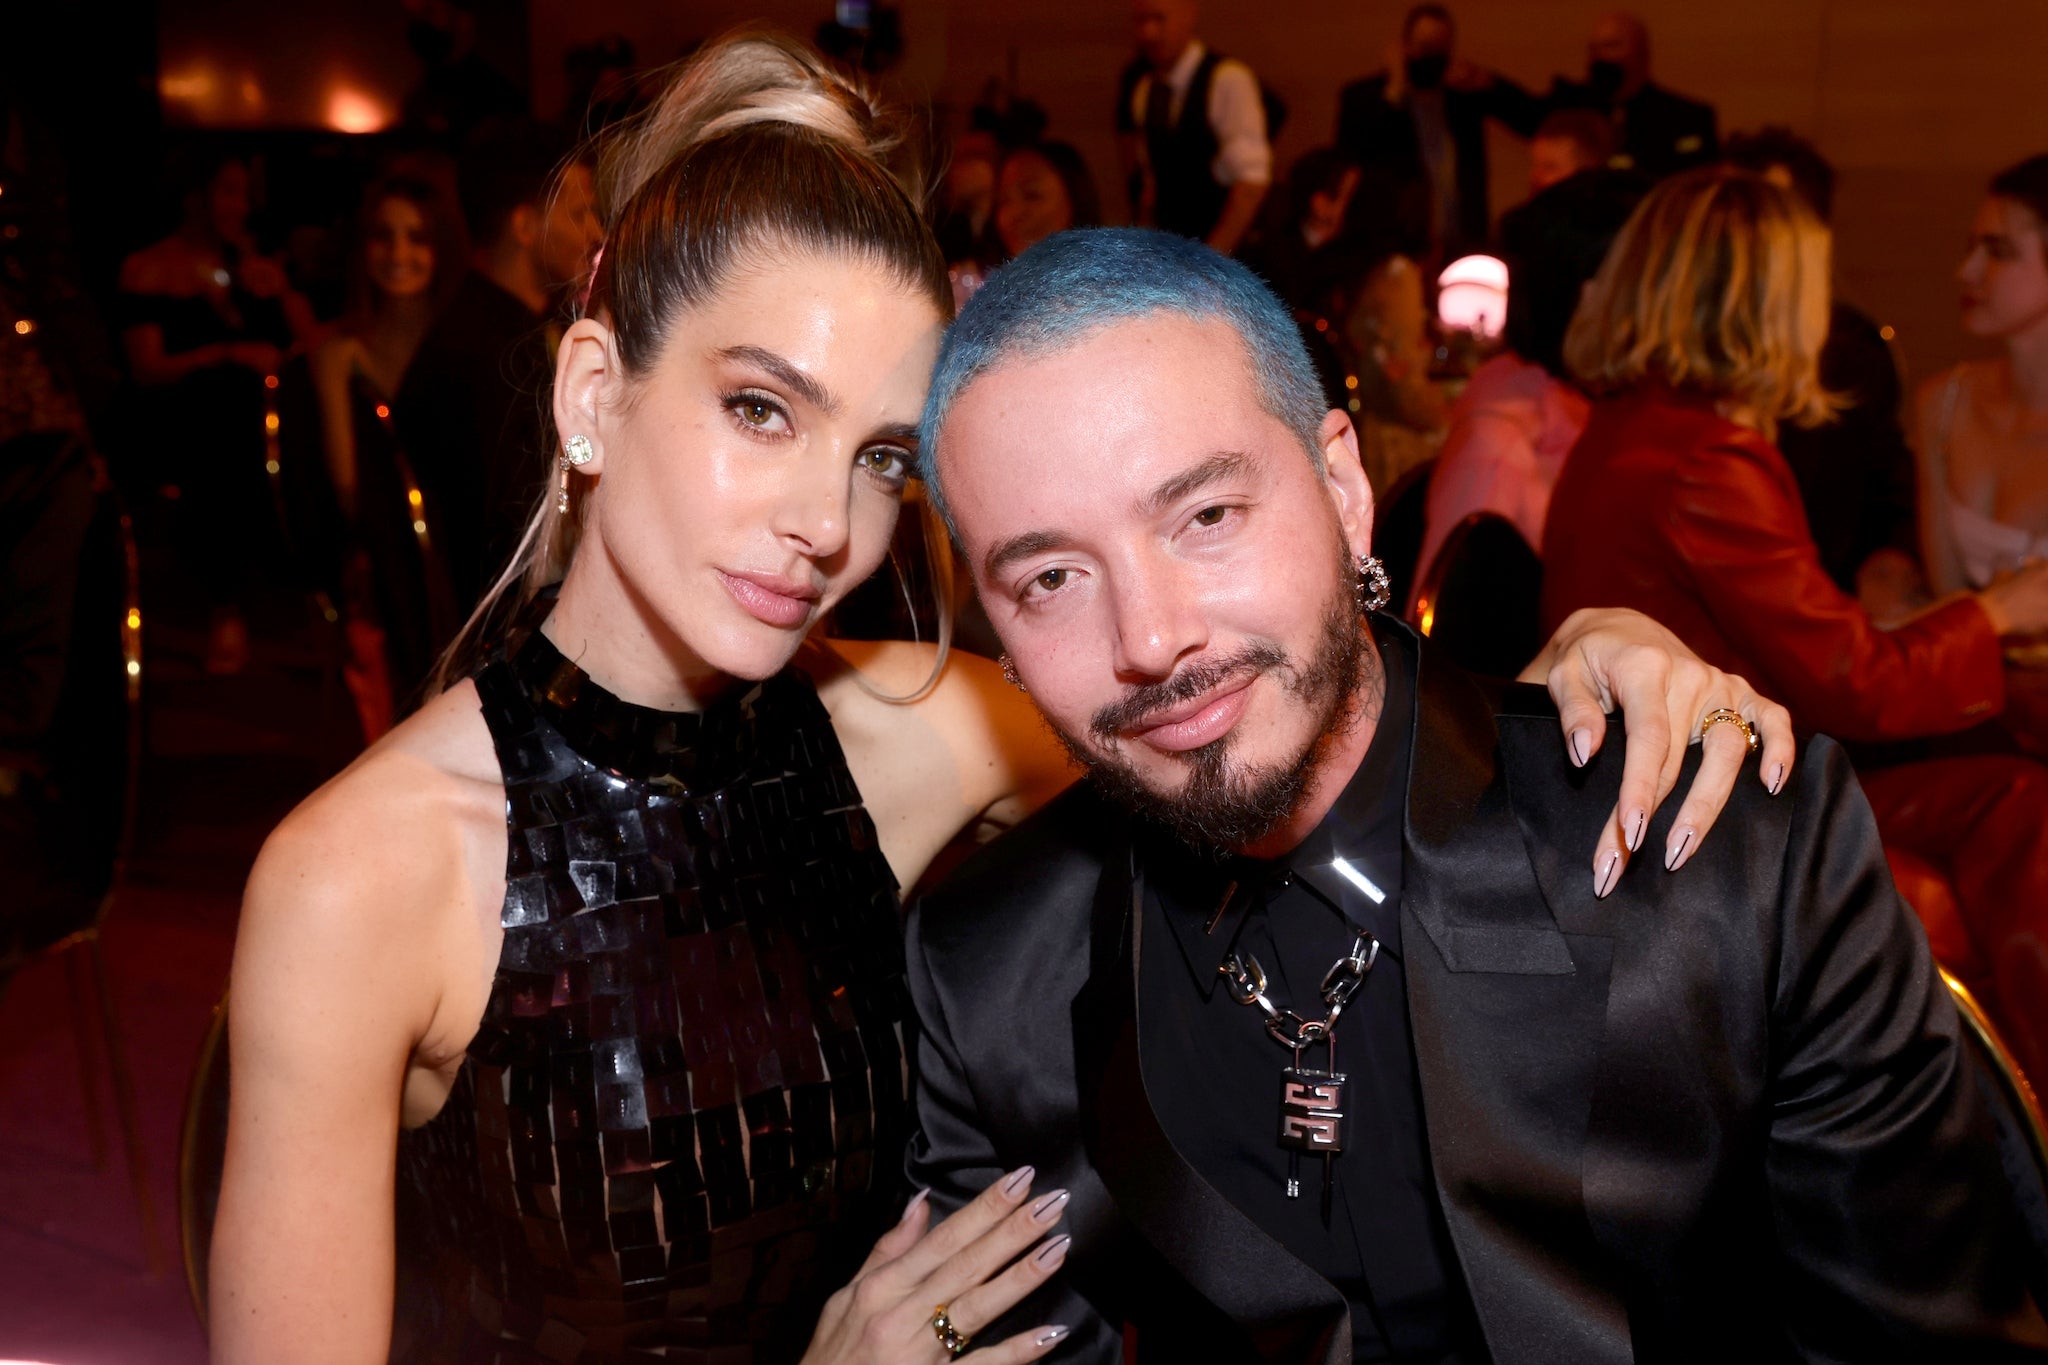 Balvin and his partner, the Argentine actor and model Valentina Ferrer, welcomed their first child, Rio, in 2021